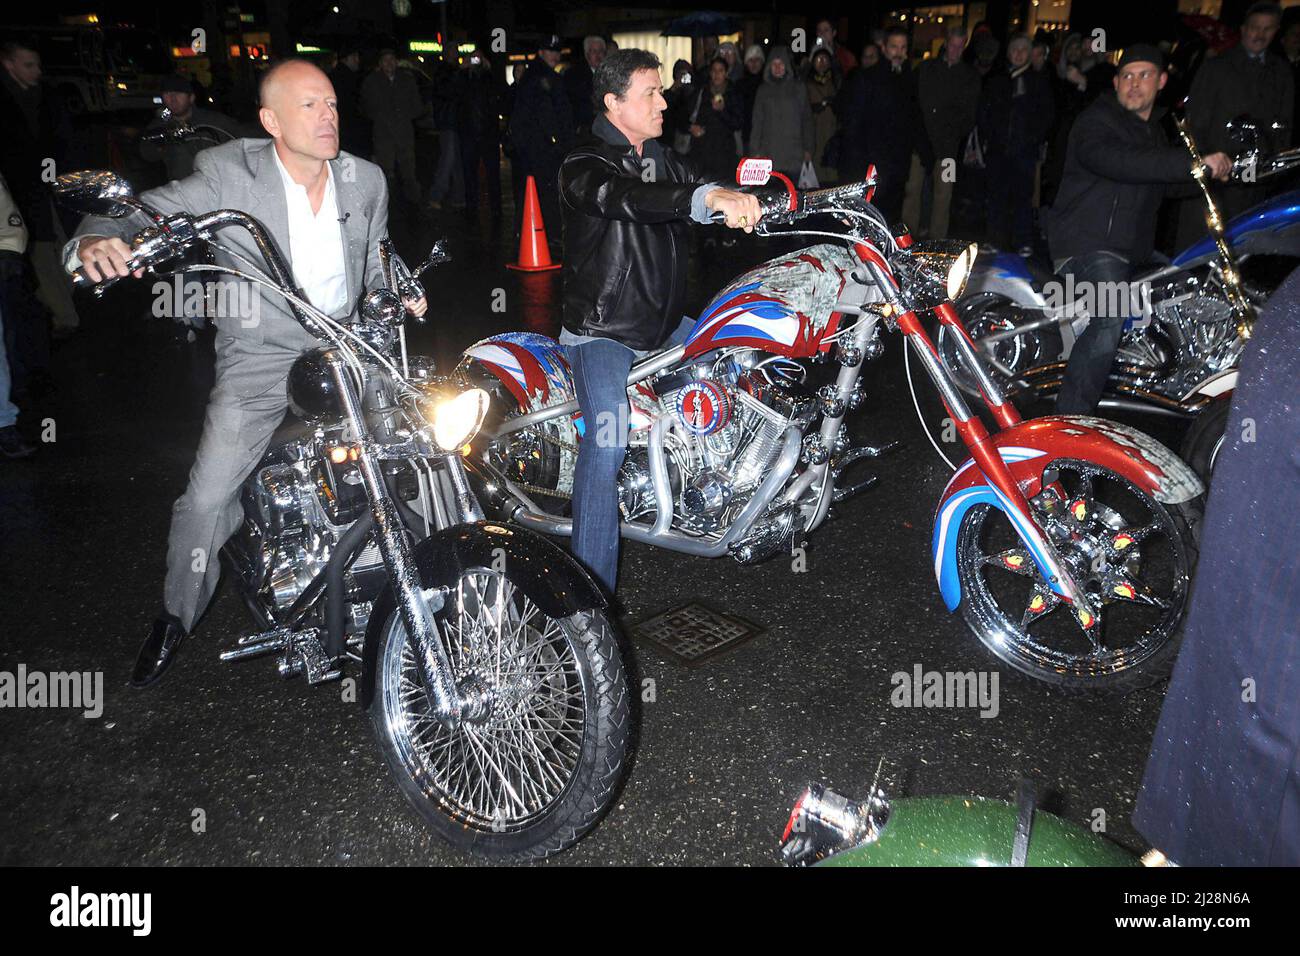 Manhattan, United States Of America. 17th Jan, 2008. NEW YORK - JANUARY 17, 2008: Actors Bruce Willis, Sylvester Stallone, the Teutul's ( America Chopper) and host David Letterman all show up on Chopper Motorcycles for the taping of 'Late Show With David Letterman' at the Ed Sullivan Theater January 17, 2008 in New York City. People: Bruce Willis; Sylvester Stallone www.StormsMediaGroup.com Credit: Storms Media Group/Alamy Live News Stock Photo